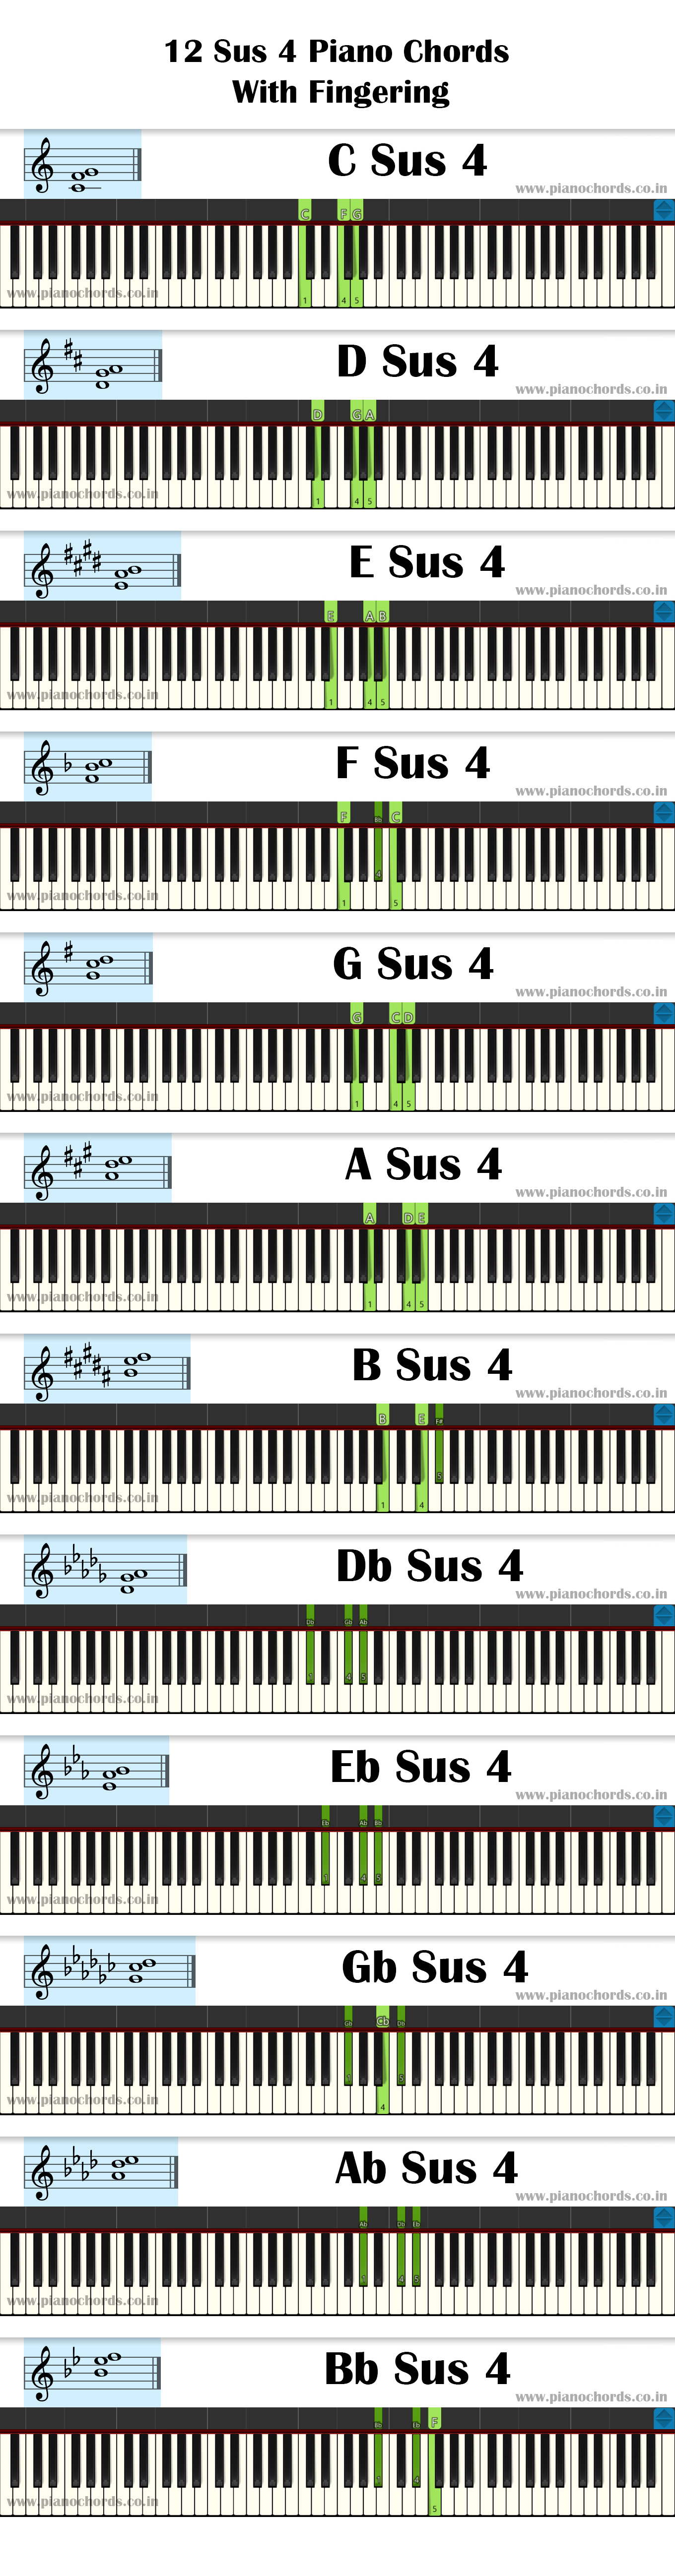 12 Sus 4 Piano Chords With Fingering, Diagram, Staff Notation